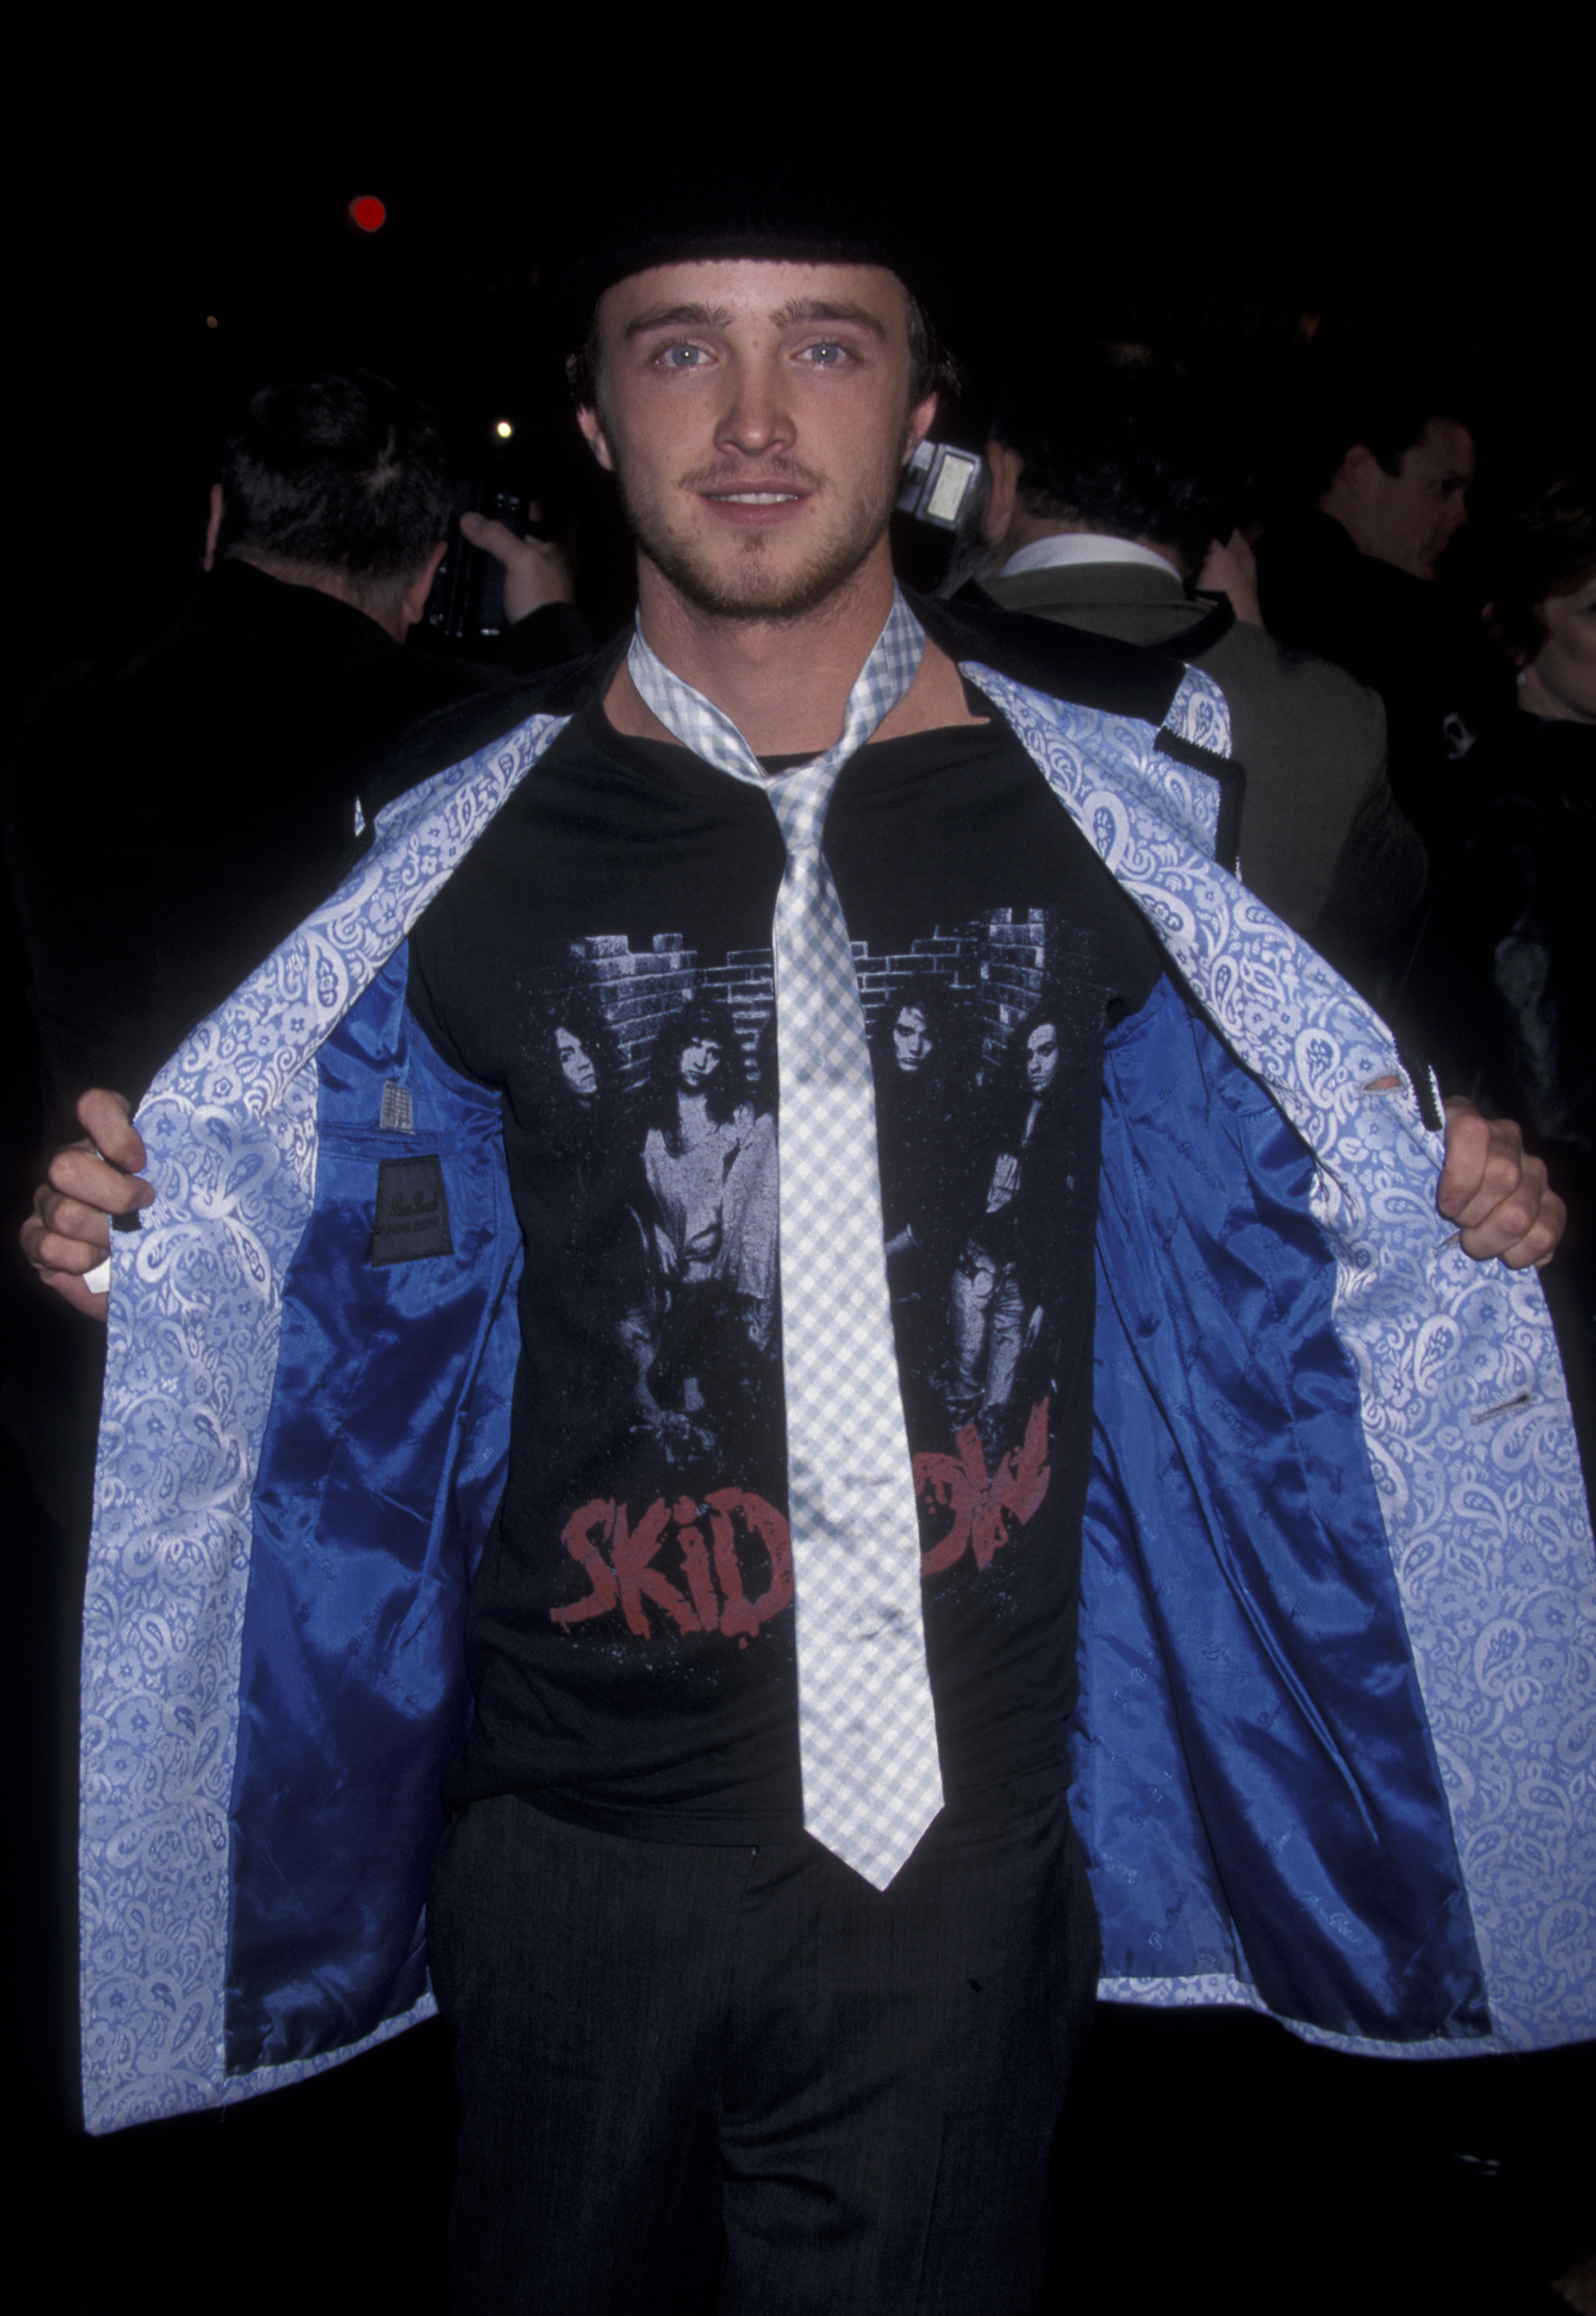 Wearing a Skid Row T-shirt, tie, and open jacket